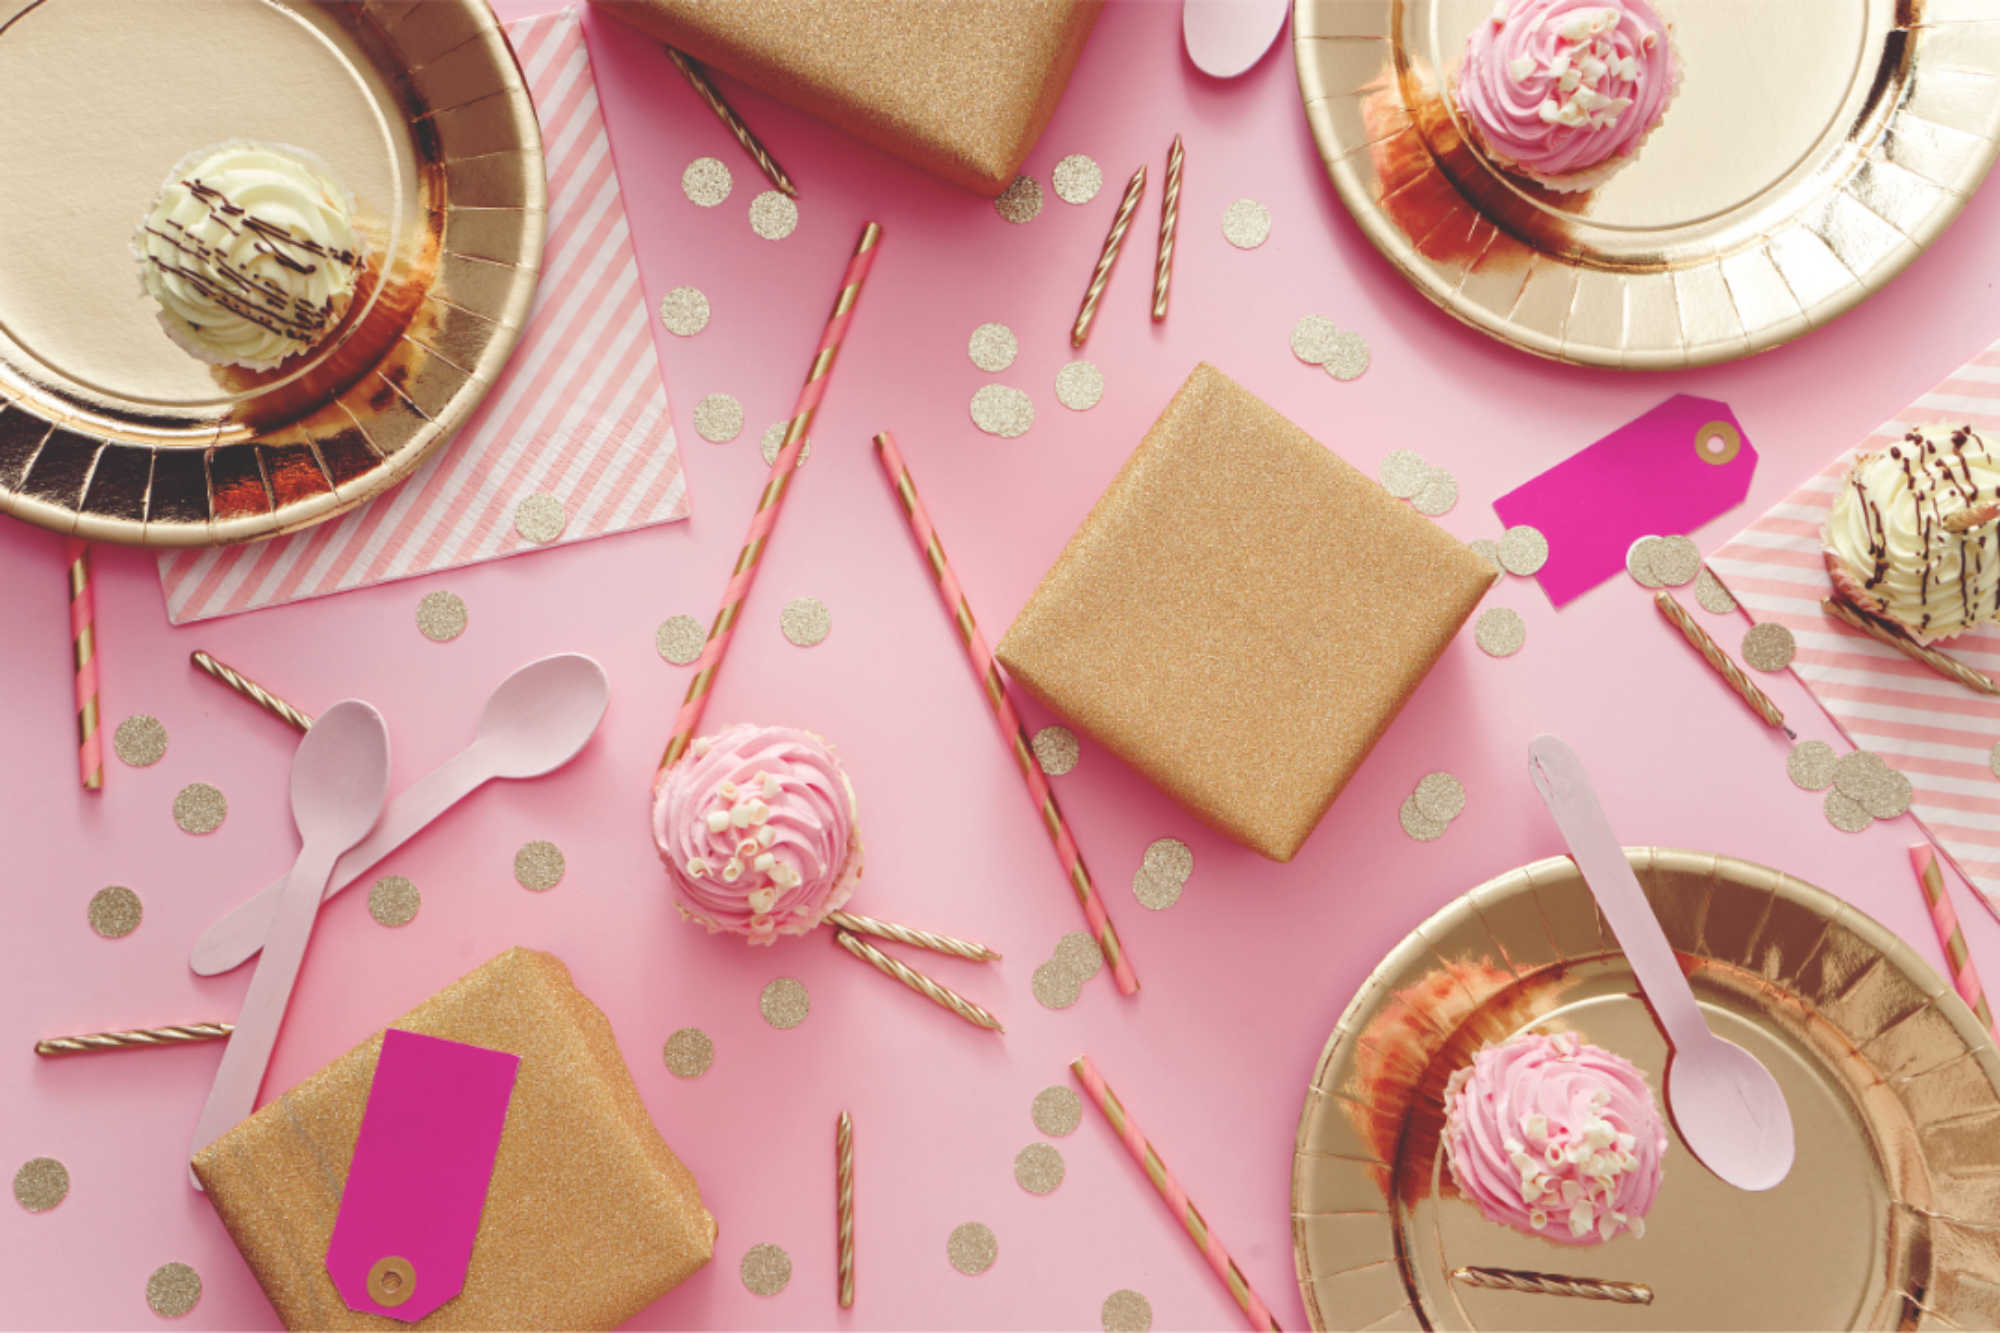 A pink table covered with gold plates, gold napkins, and confetti in various shades of gold and pink.